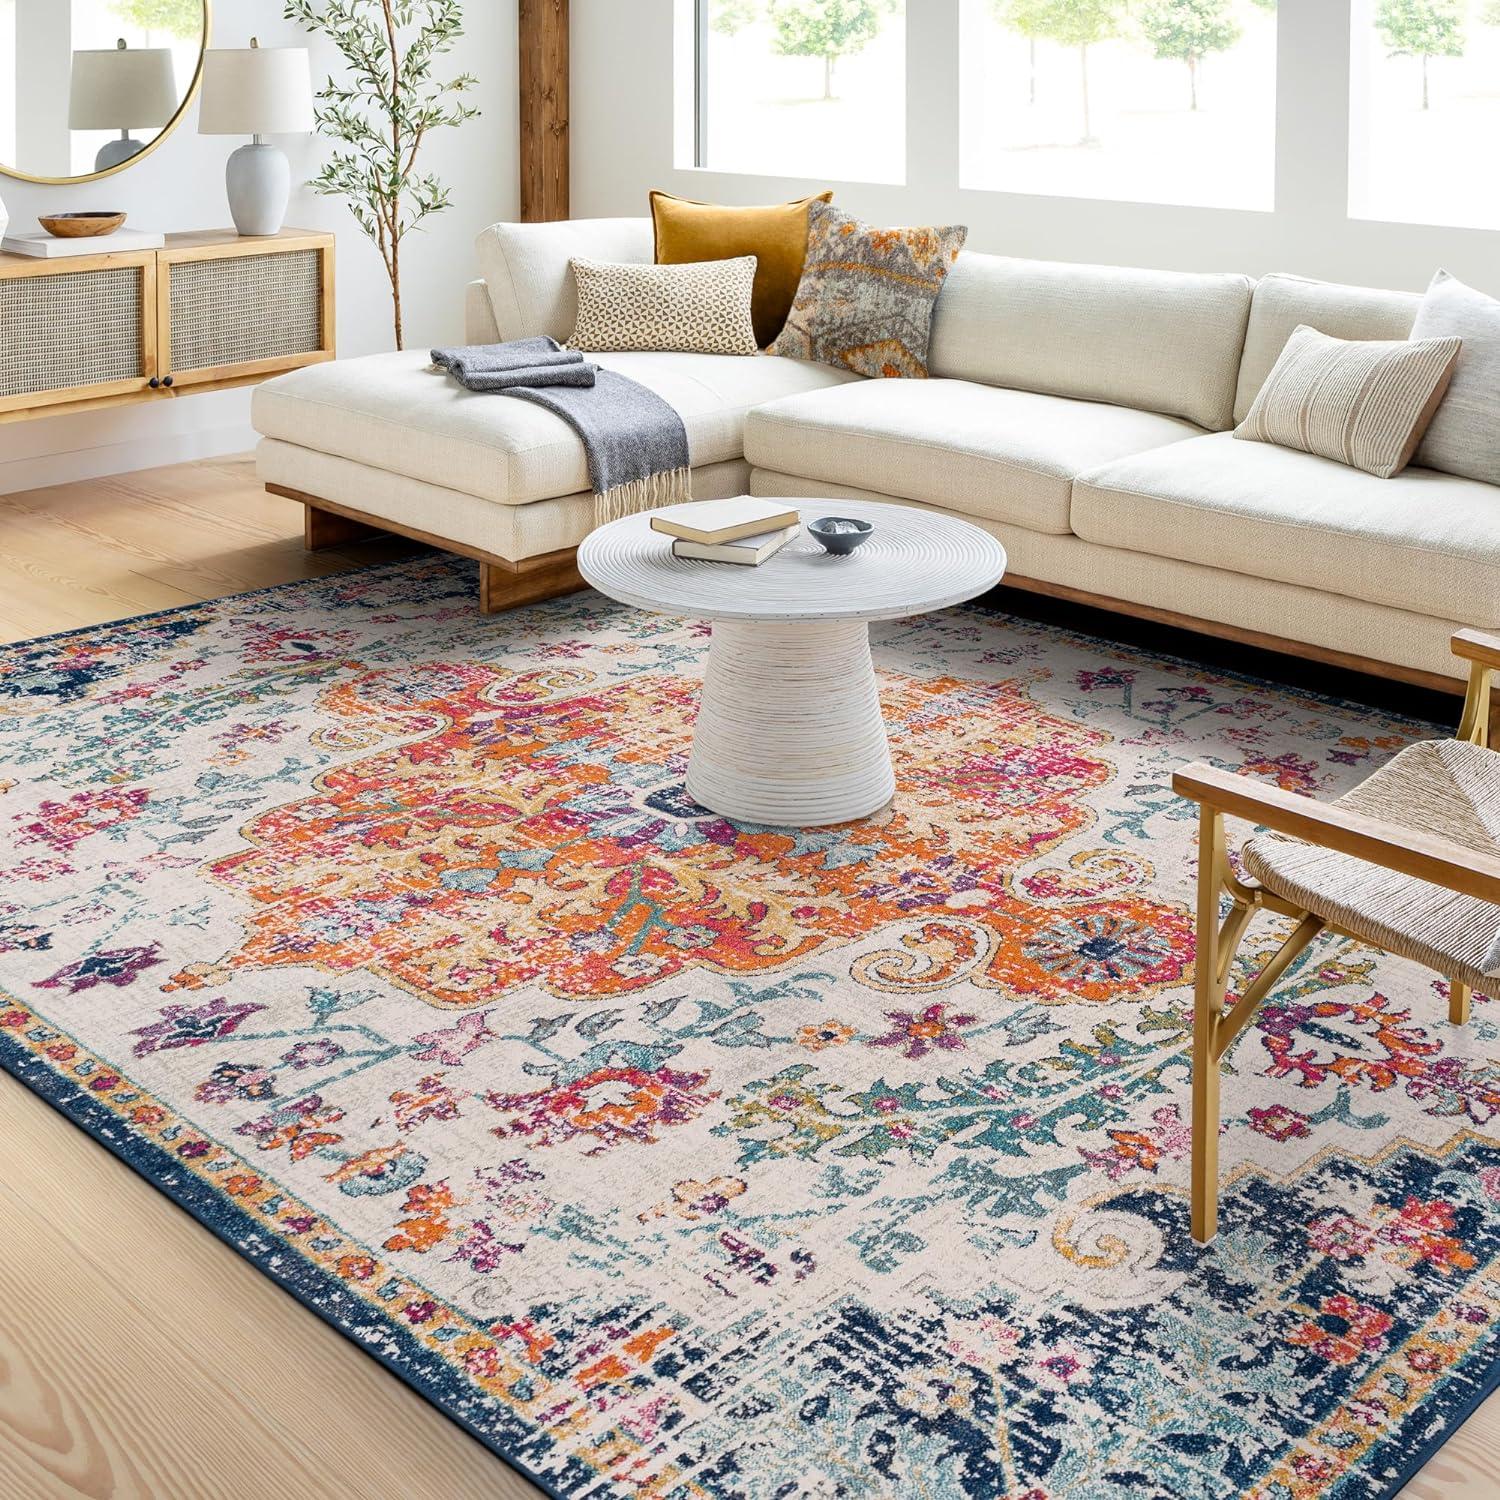 Artistic Weavers Odelia Traditional Area Rug for $44 Shipped